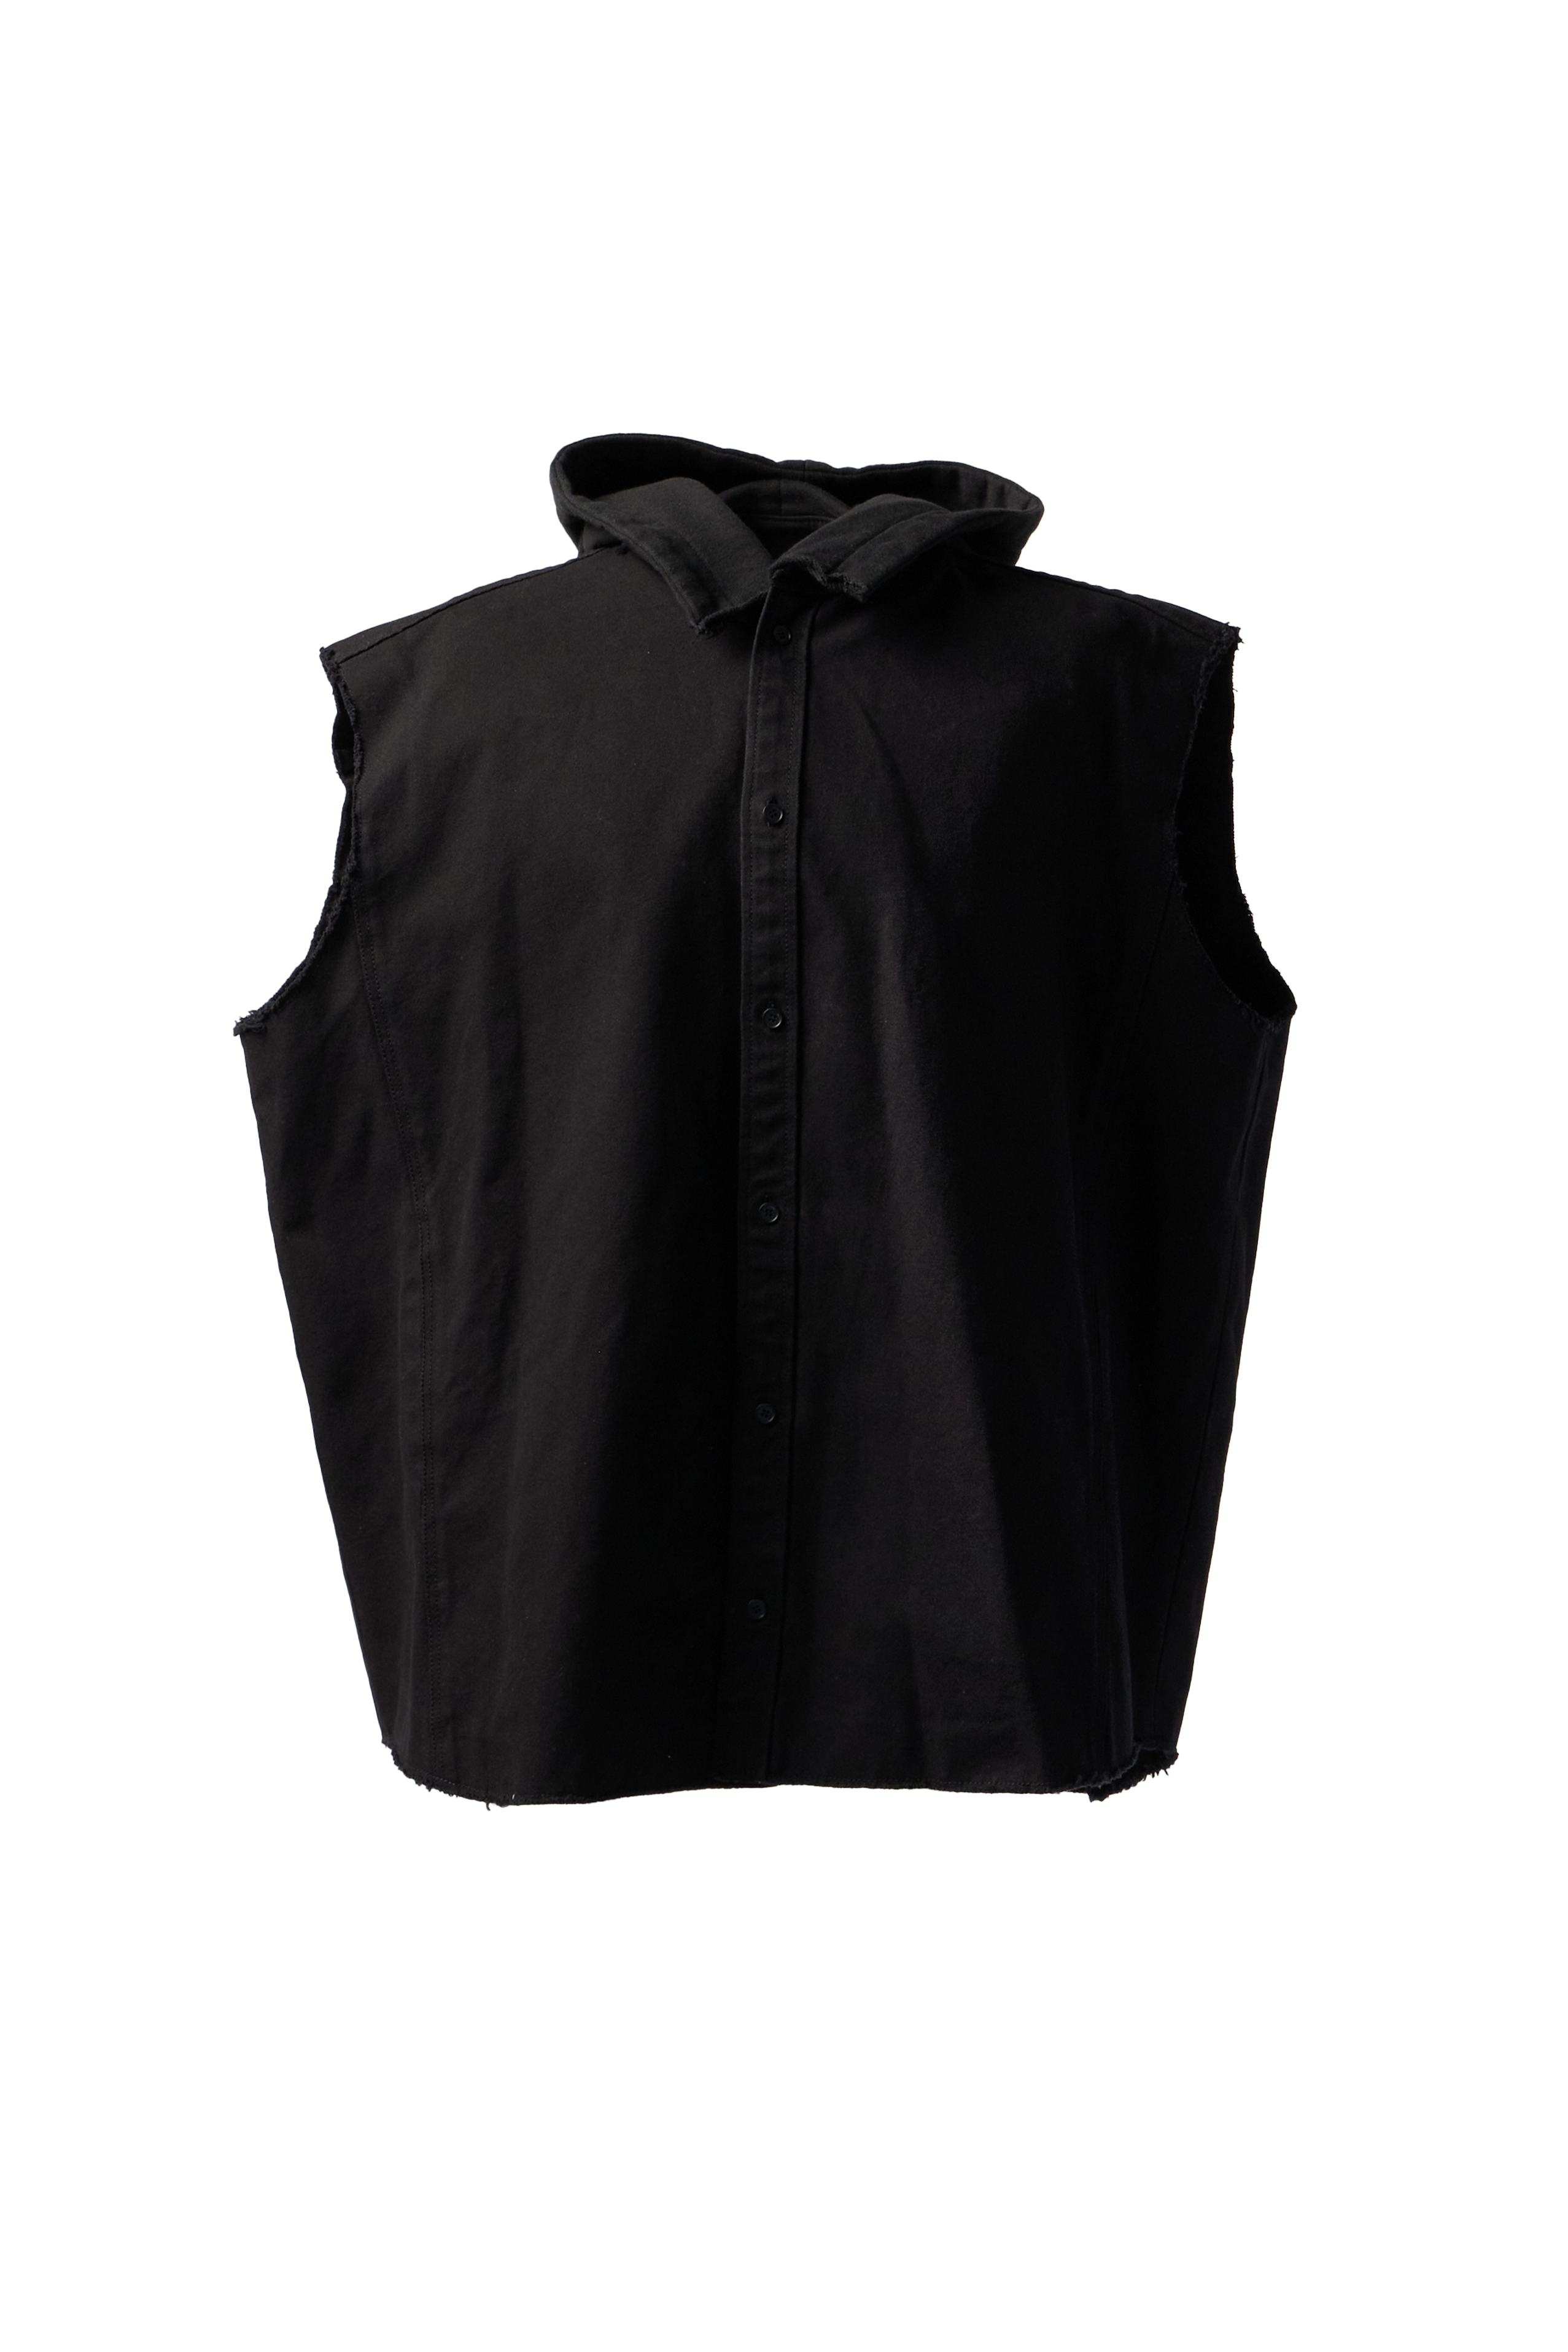 WE11DONE - Hooded Sleeveless Button Up Shirt product image